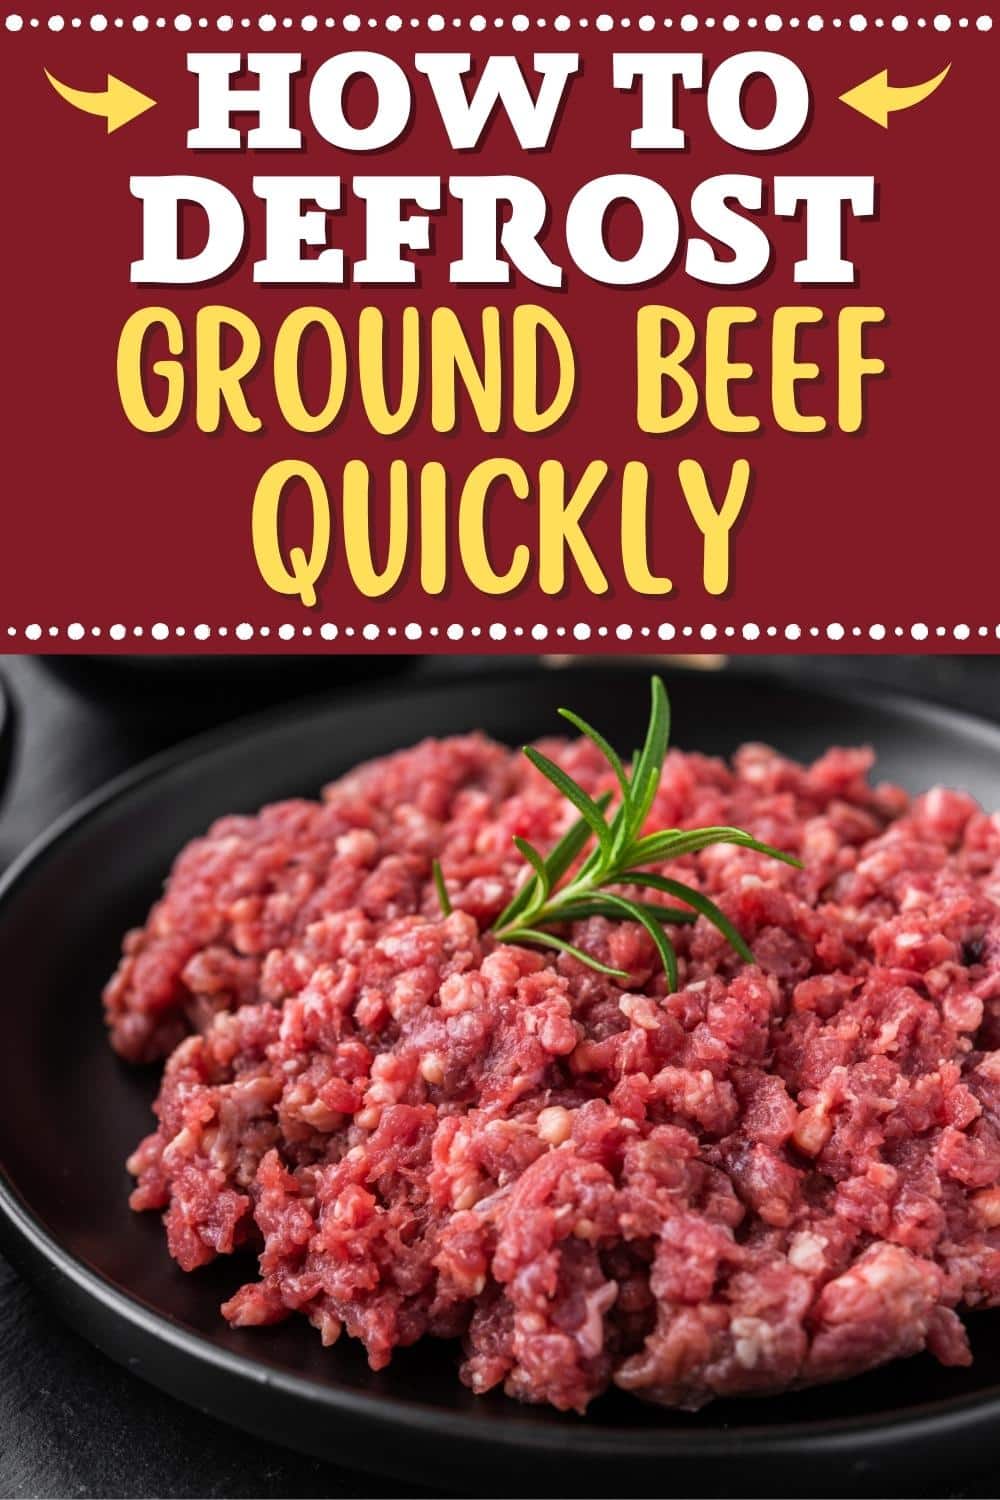 How to Defrost Ground Beef Quickly